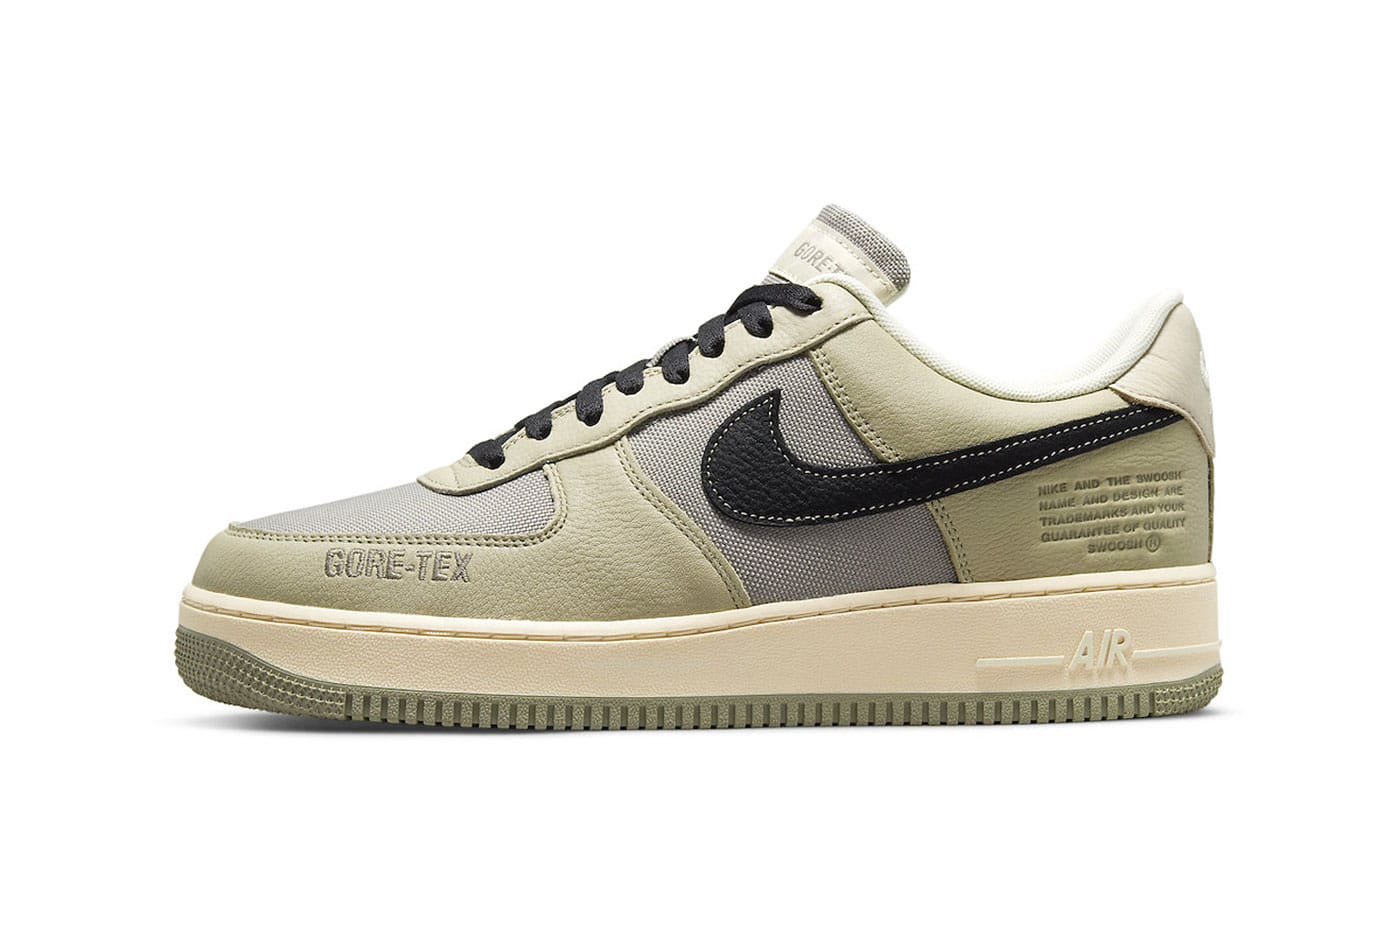 Nike Introduces New Air Force 1 GORE-TEX Colors | Hypebeast